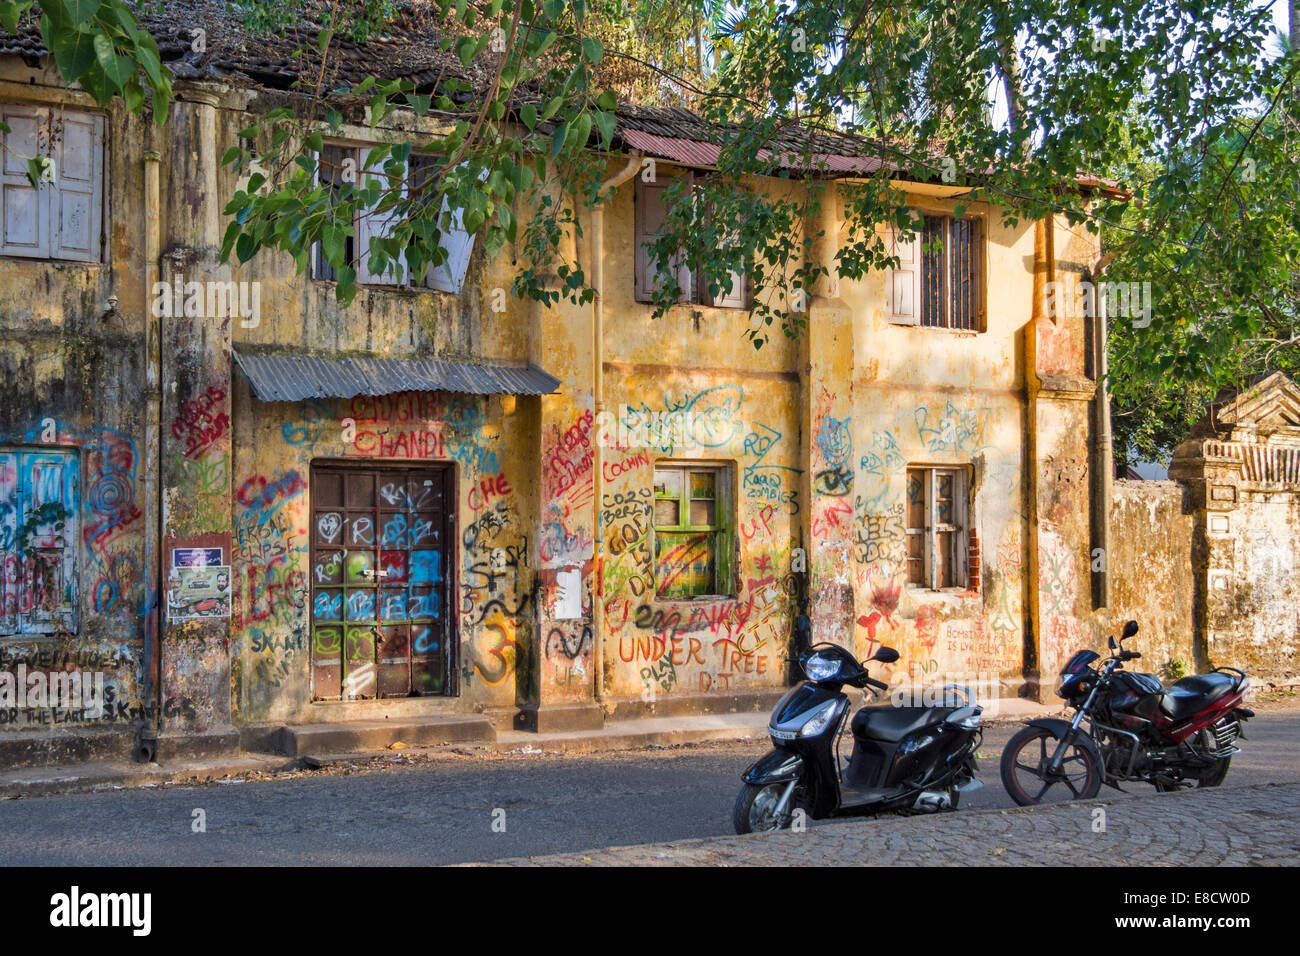 OLD COLONIAL HOUSE PORT KOCHI OR  COCHIN INDIA NOW COVERED BY AN ARTISTS GRAFFITI Stock Photo